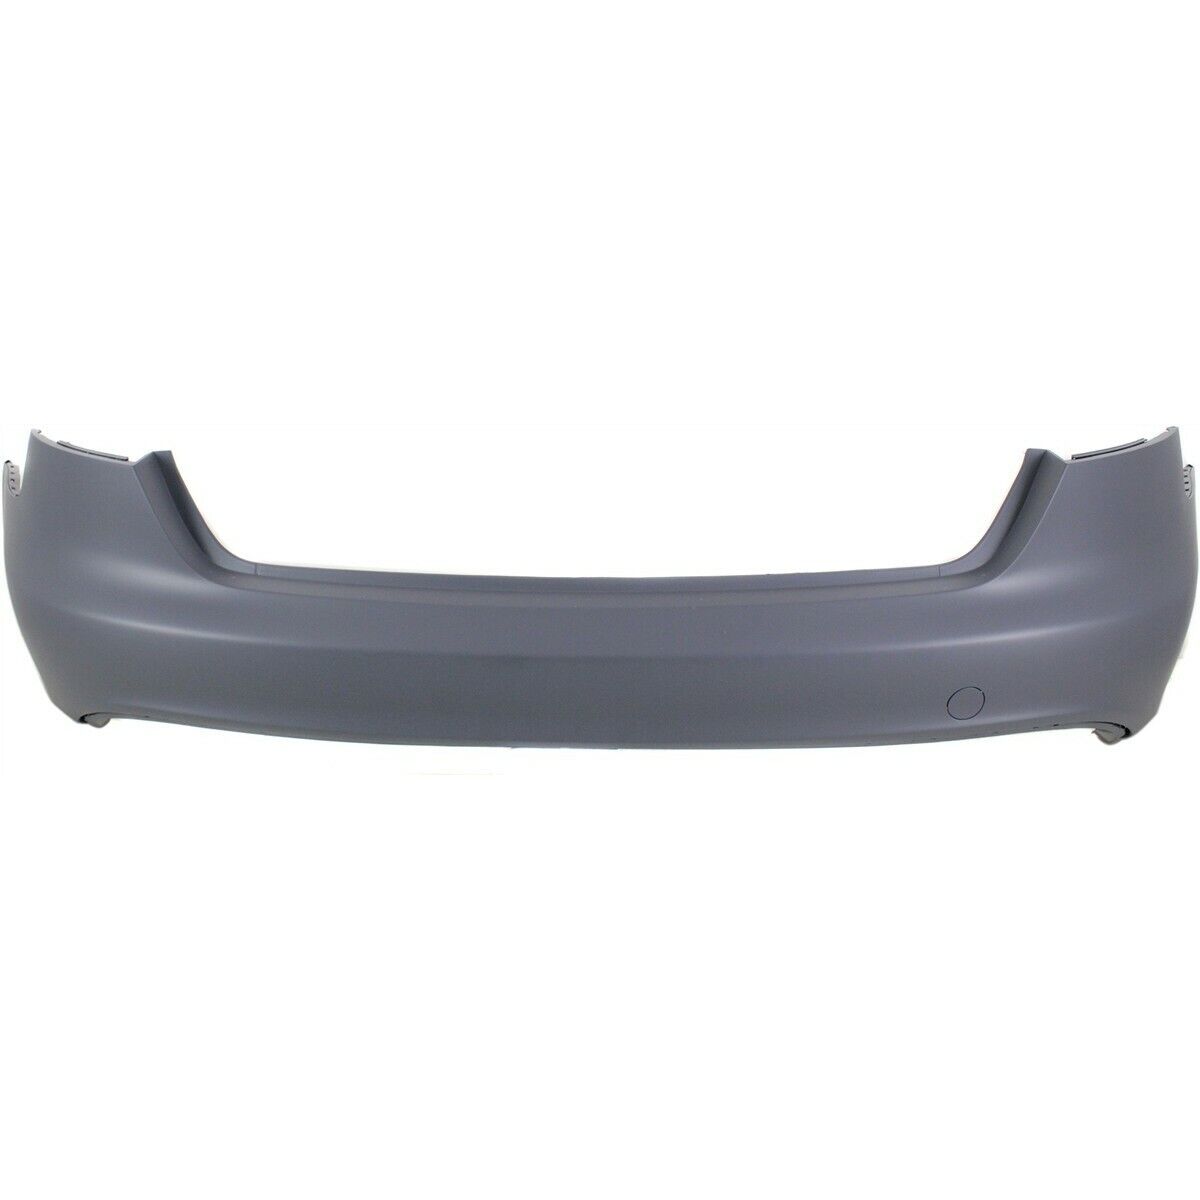 Bumper Cover For 2009-2012 Audi A4 Quattro Sedan Rear Primed With S-Line Package